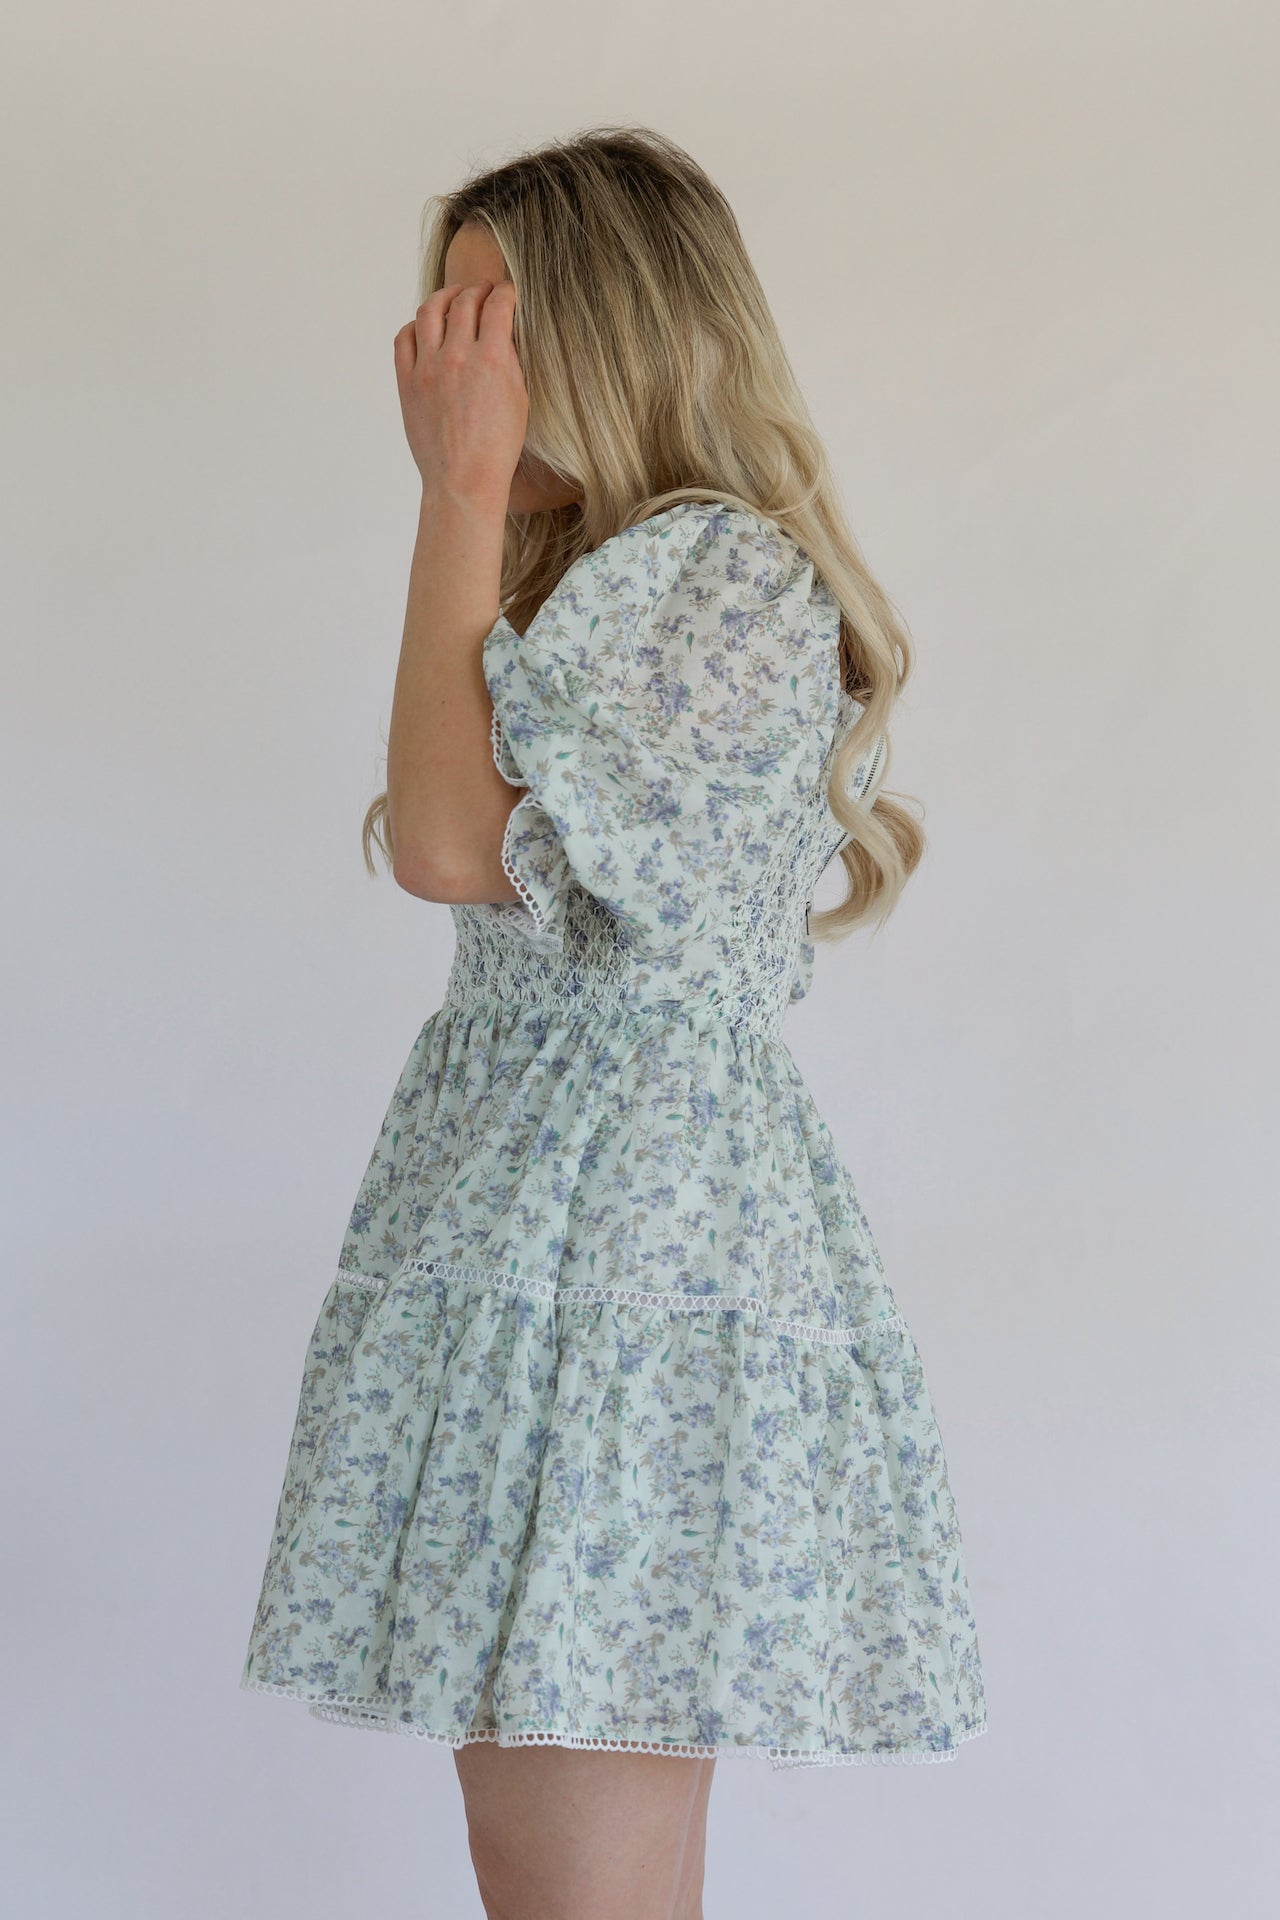 Brilliantly Blooming Blue Floral Print Puff Sleeve Skater Dress